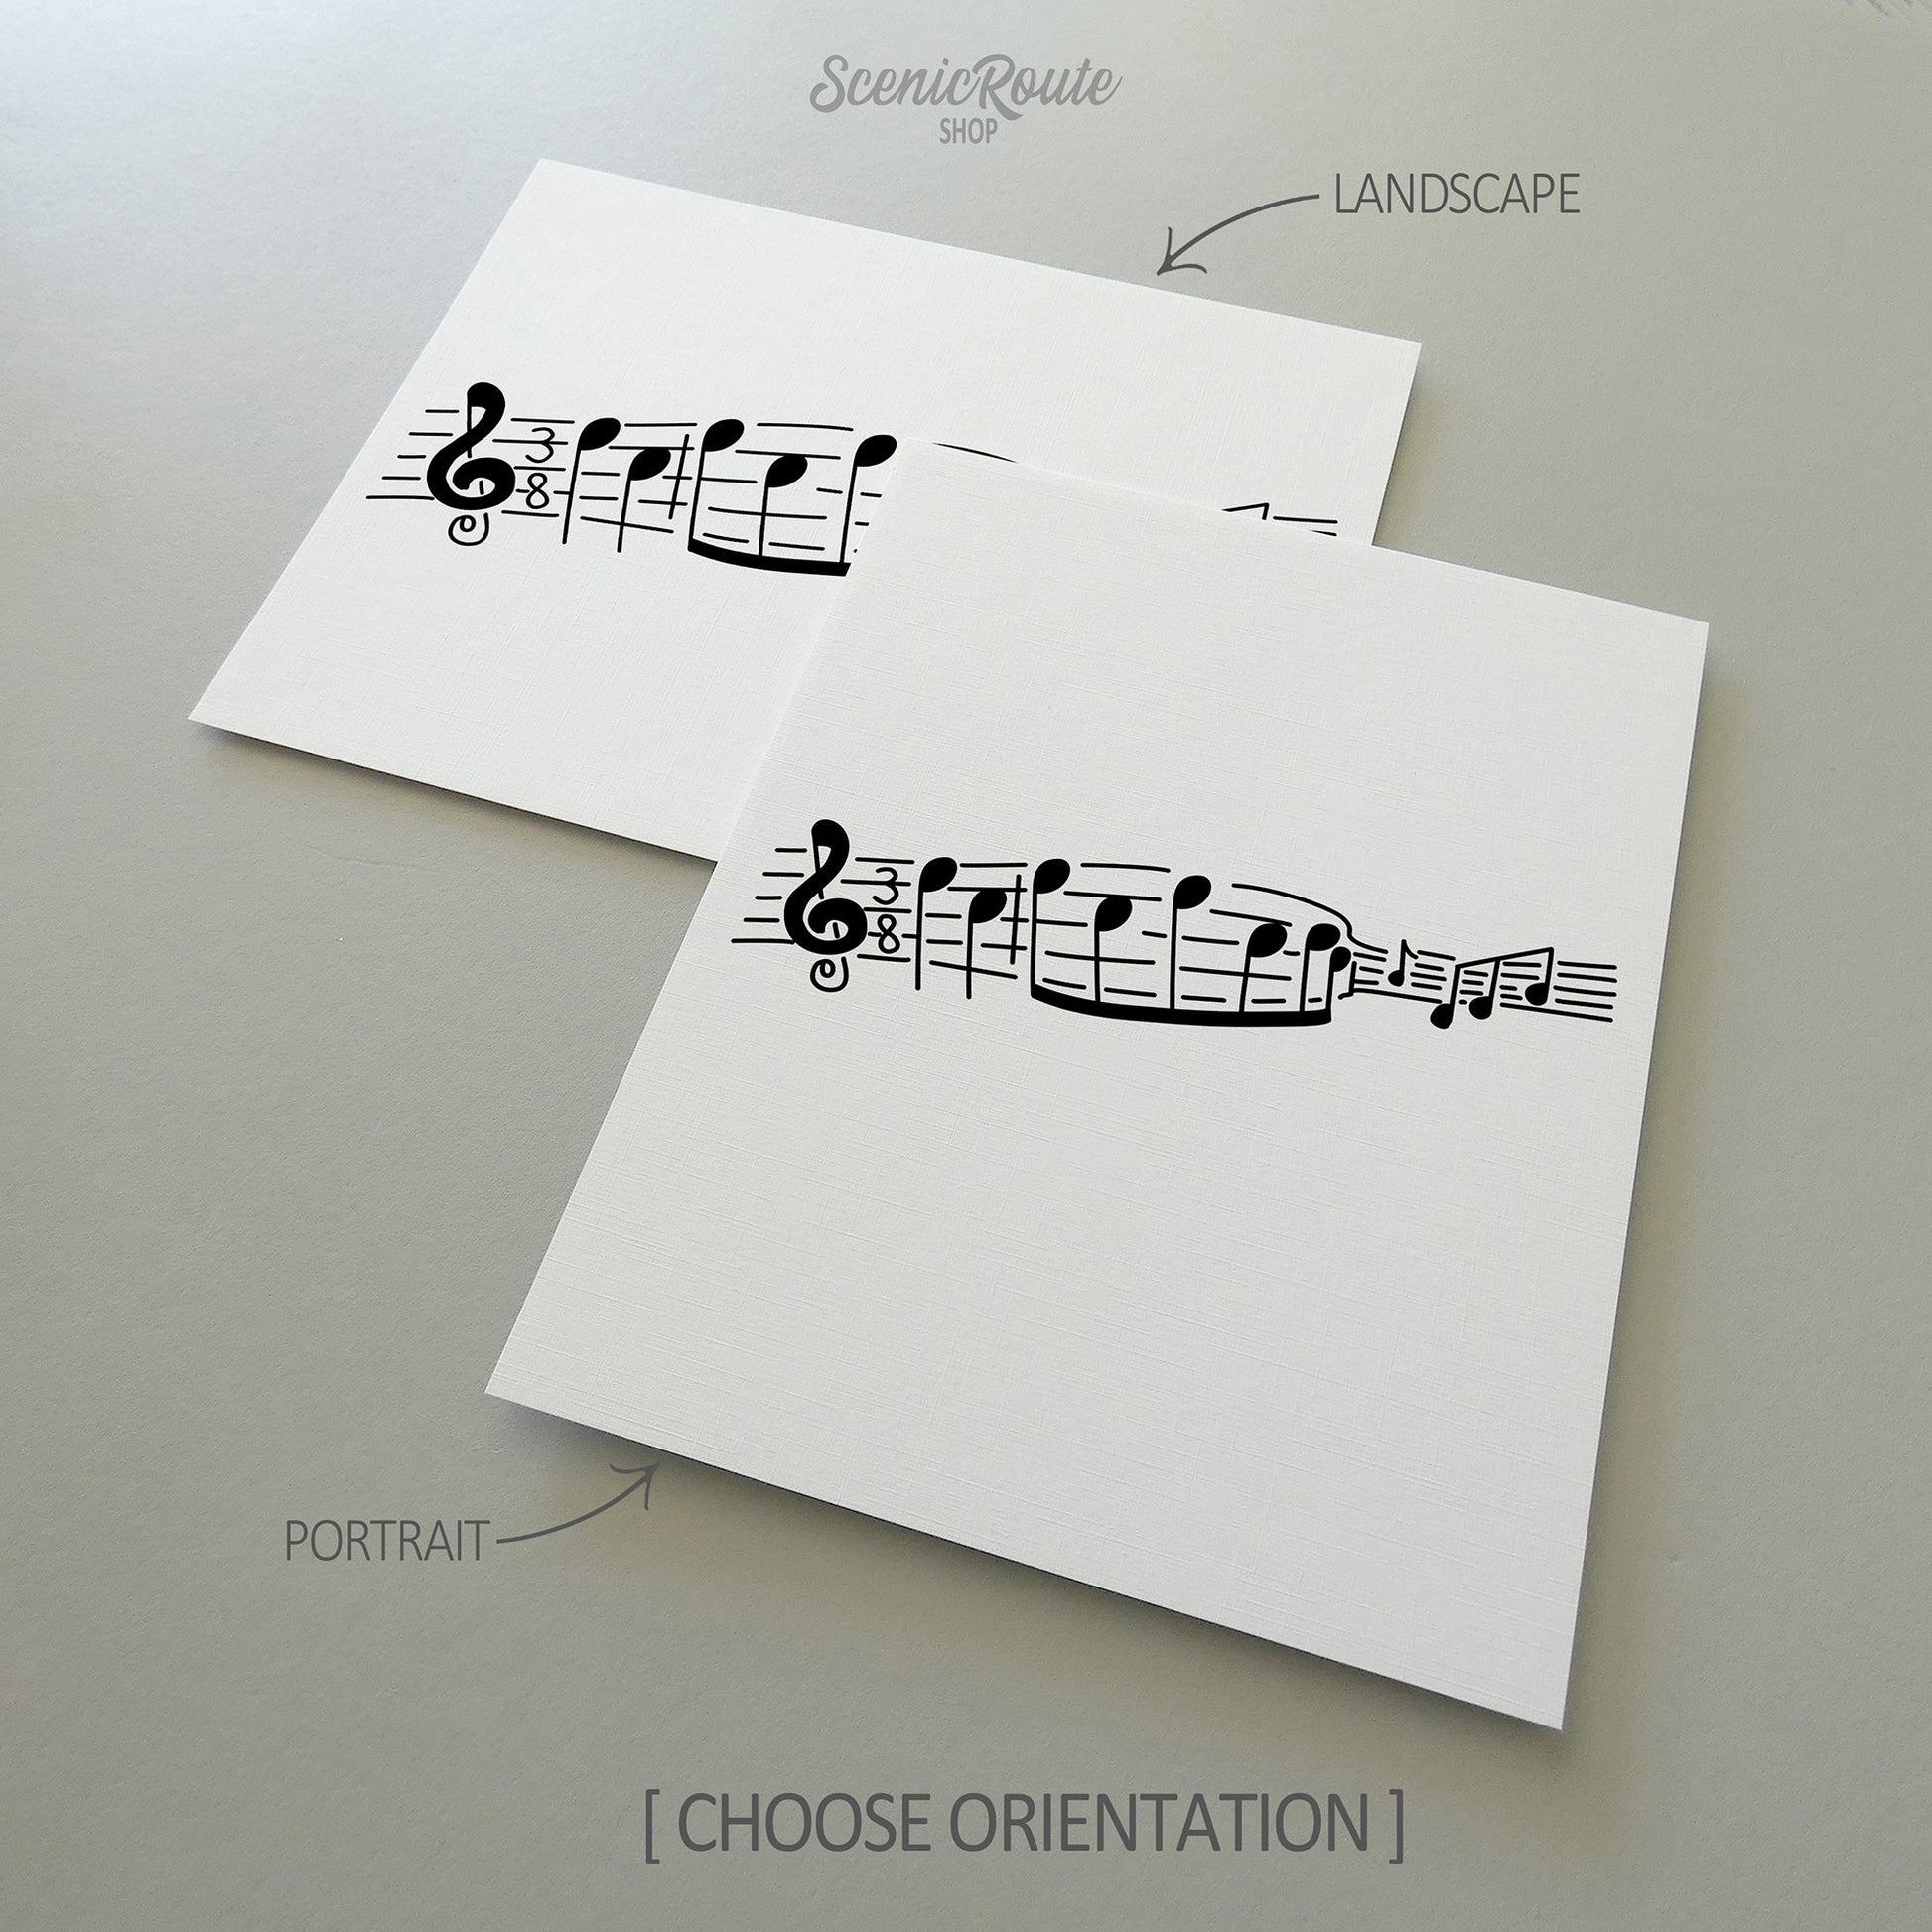 Two line art drawings of Music Notes on white linen paper with a gray background.  The pieces are shown in portrait and landscape orientation for the available art print options.